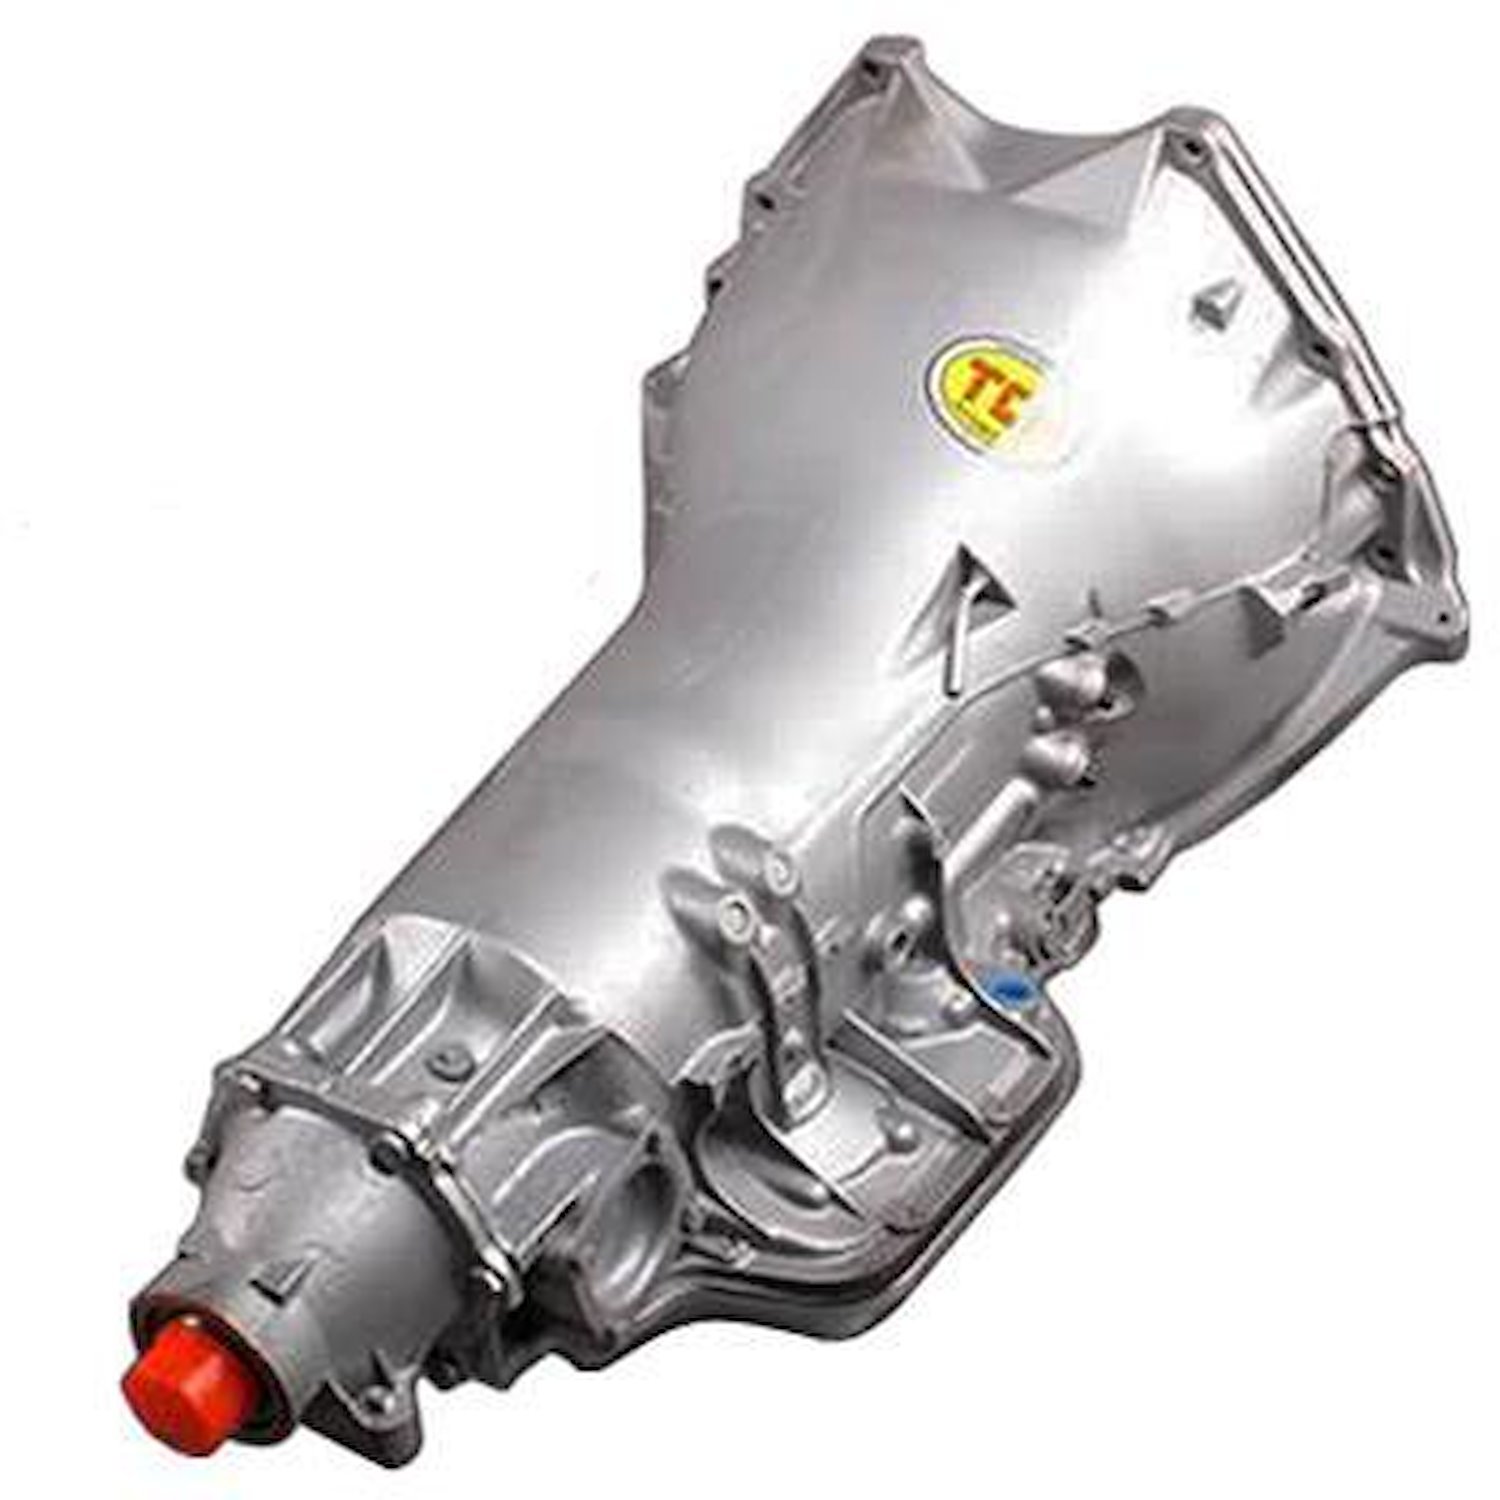 311100 TH350 StreetFighter Transmission for 1969-1979 Buick, Olds, Pontiac